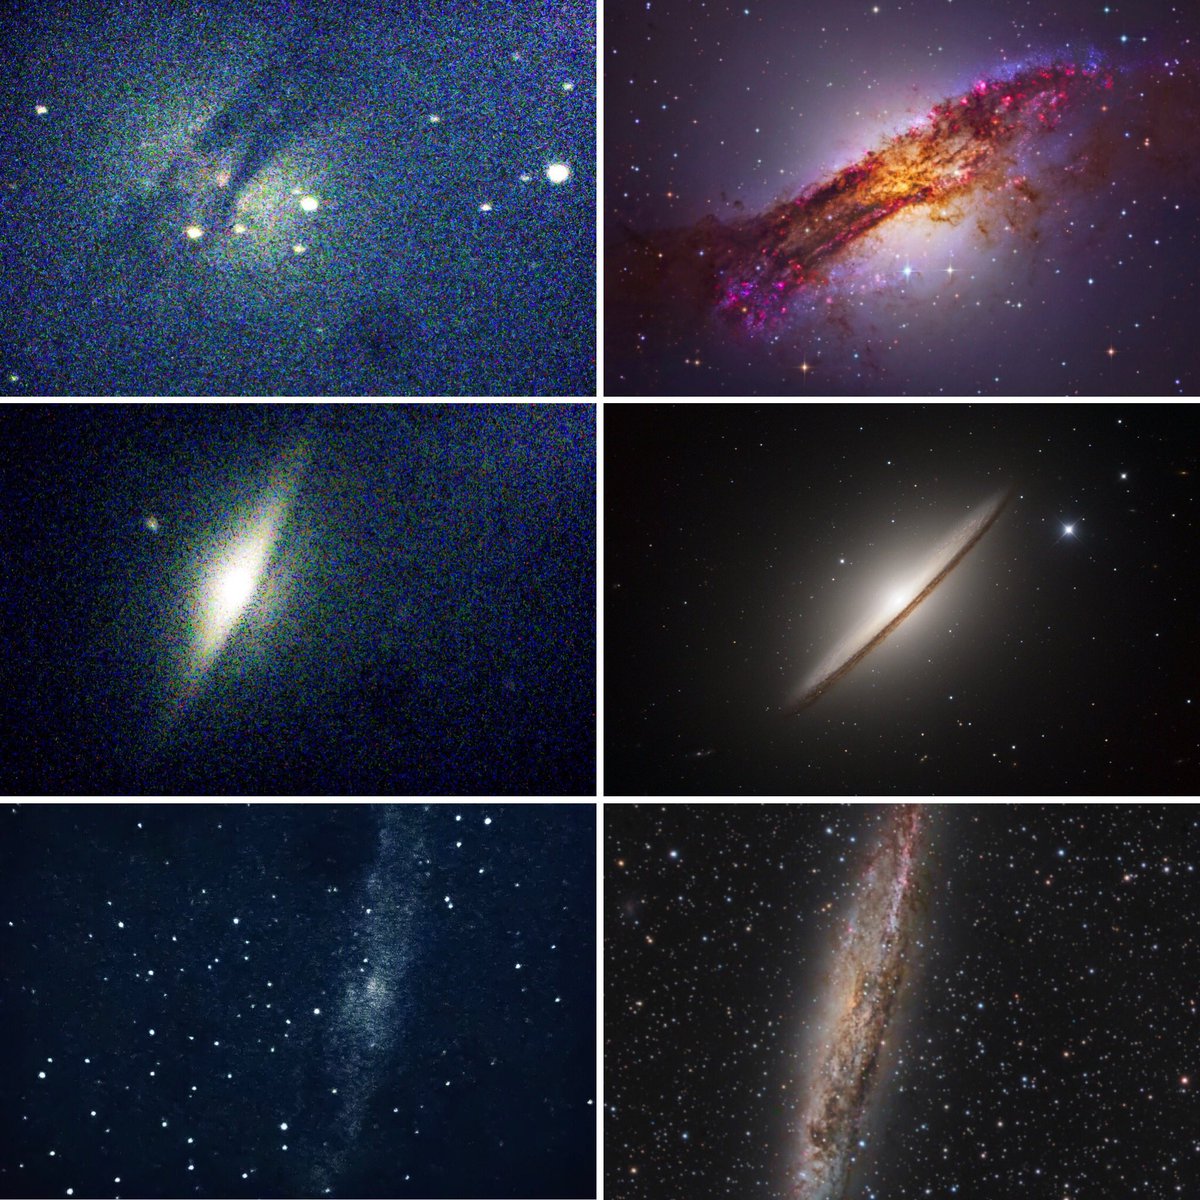 So my exciting news, caught my 3rd galaxy this week! Caldwell 83 now joins Centaurus A and Sombrero in my collection composite! Images in left column are me, images in right are Hubble & Martin Pugh (Caldwell 83).A short, photo-thread of some pics from this week...1/8